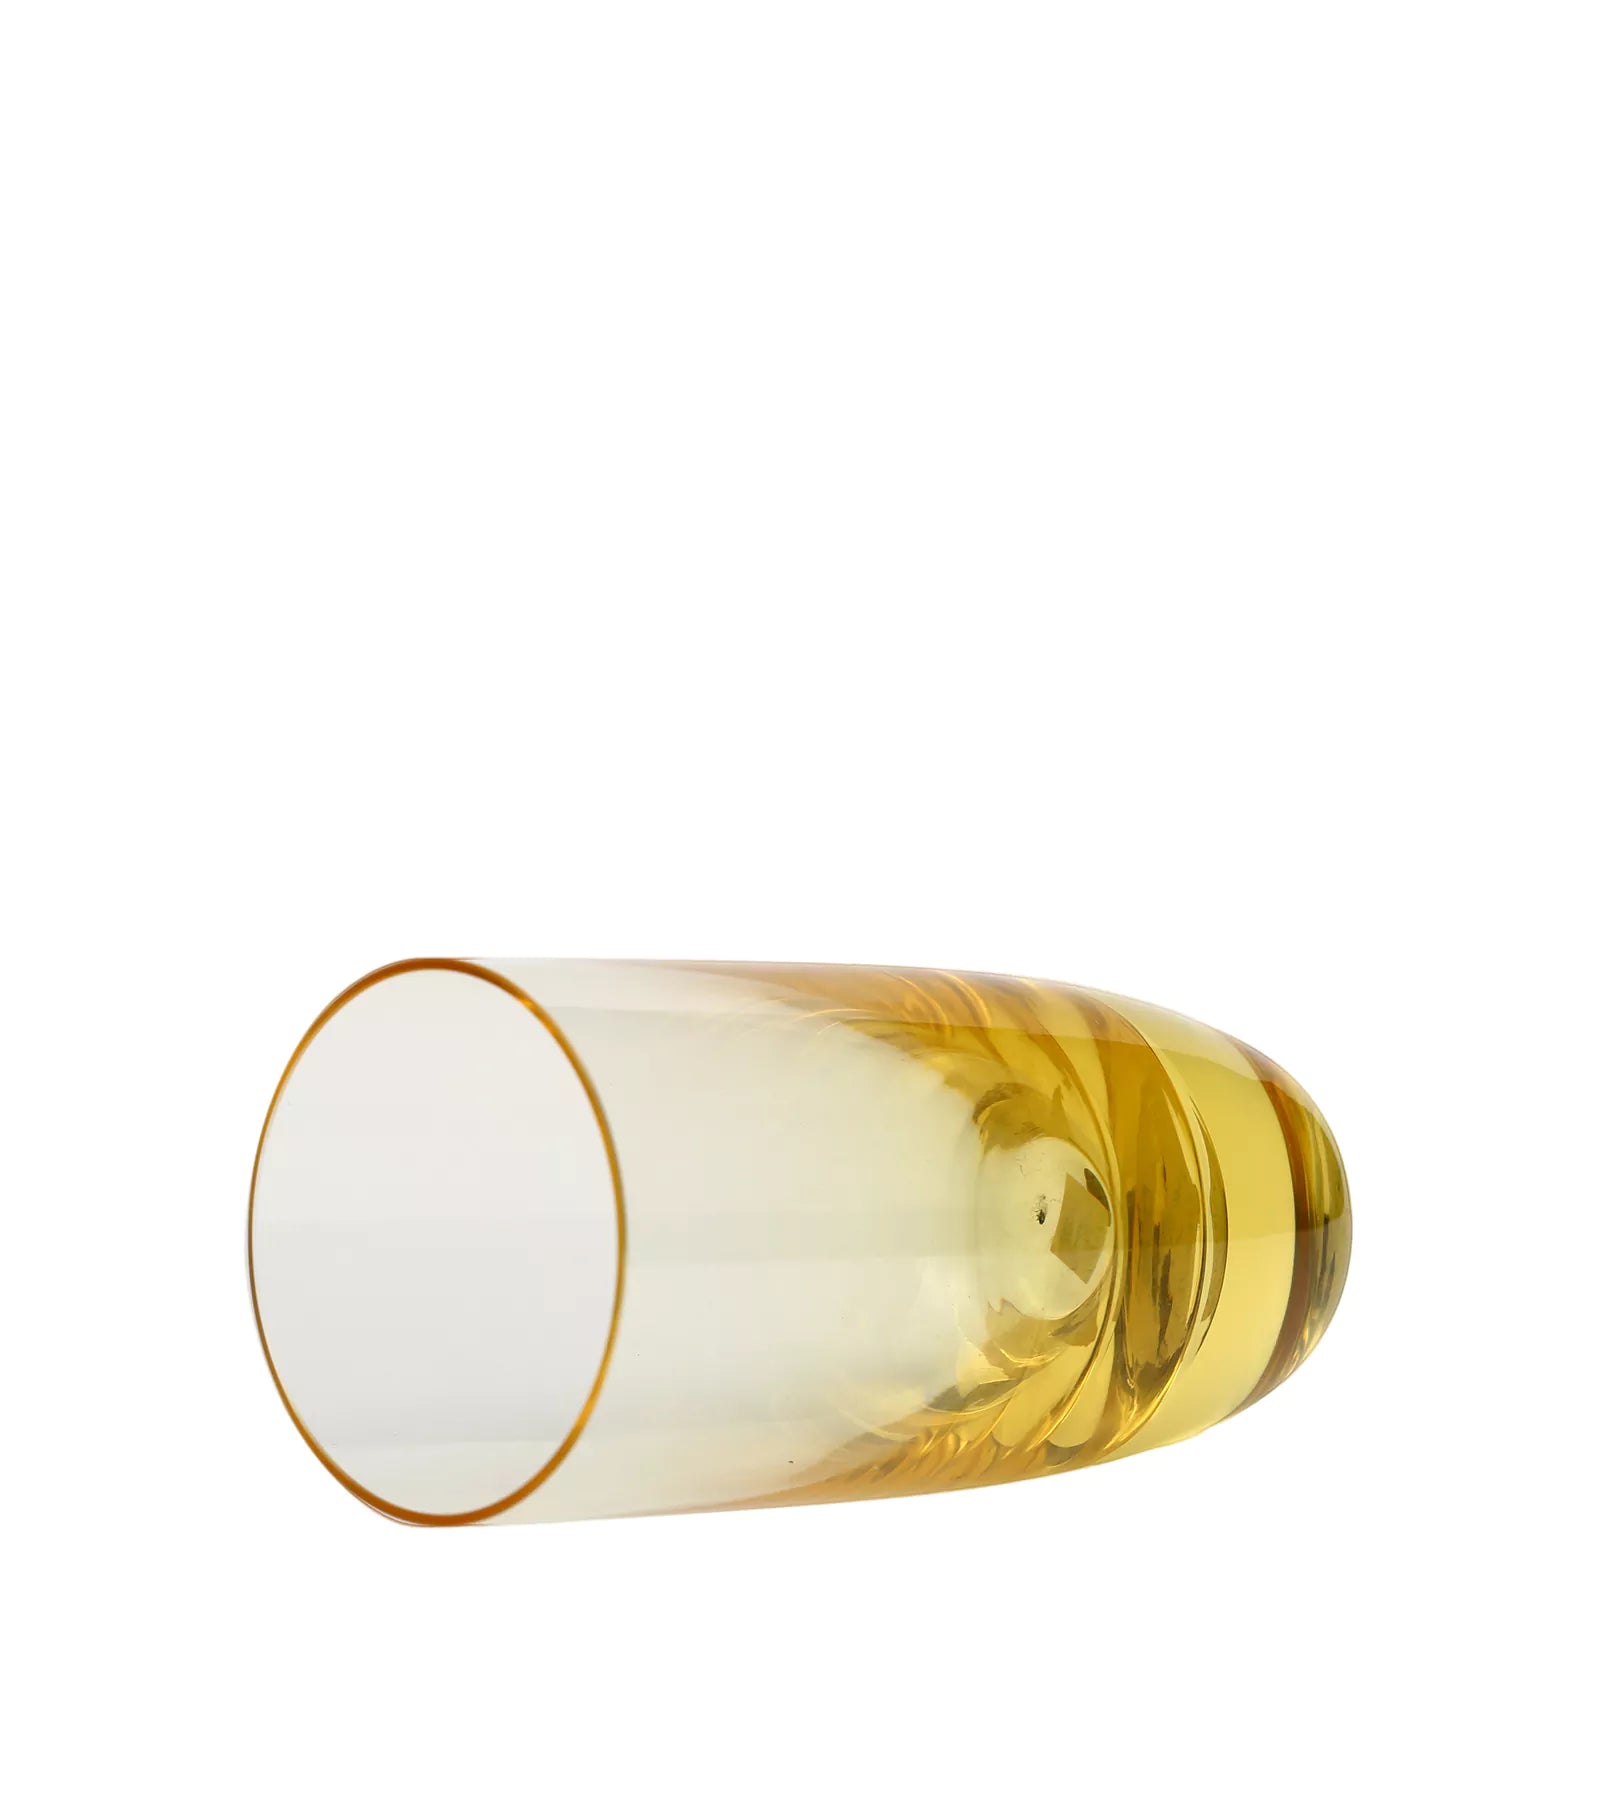 MOSER - Yellow Tint Liqueur Glass - Raise a toast in style and create unforgettable moments.